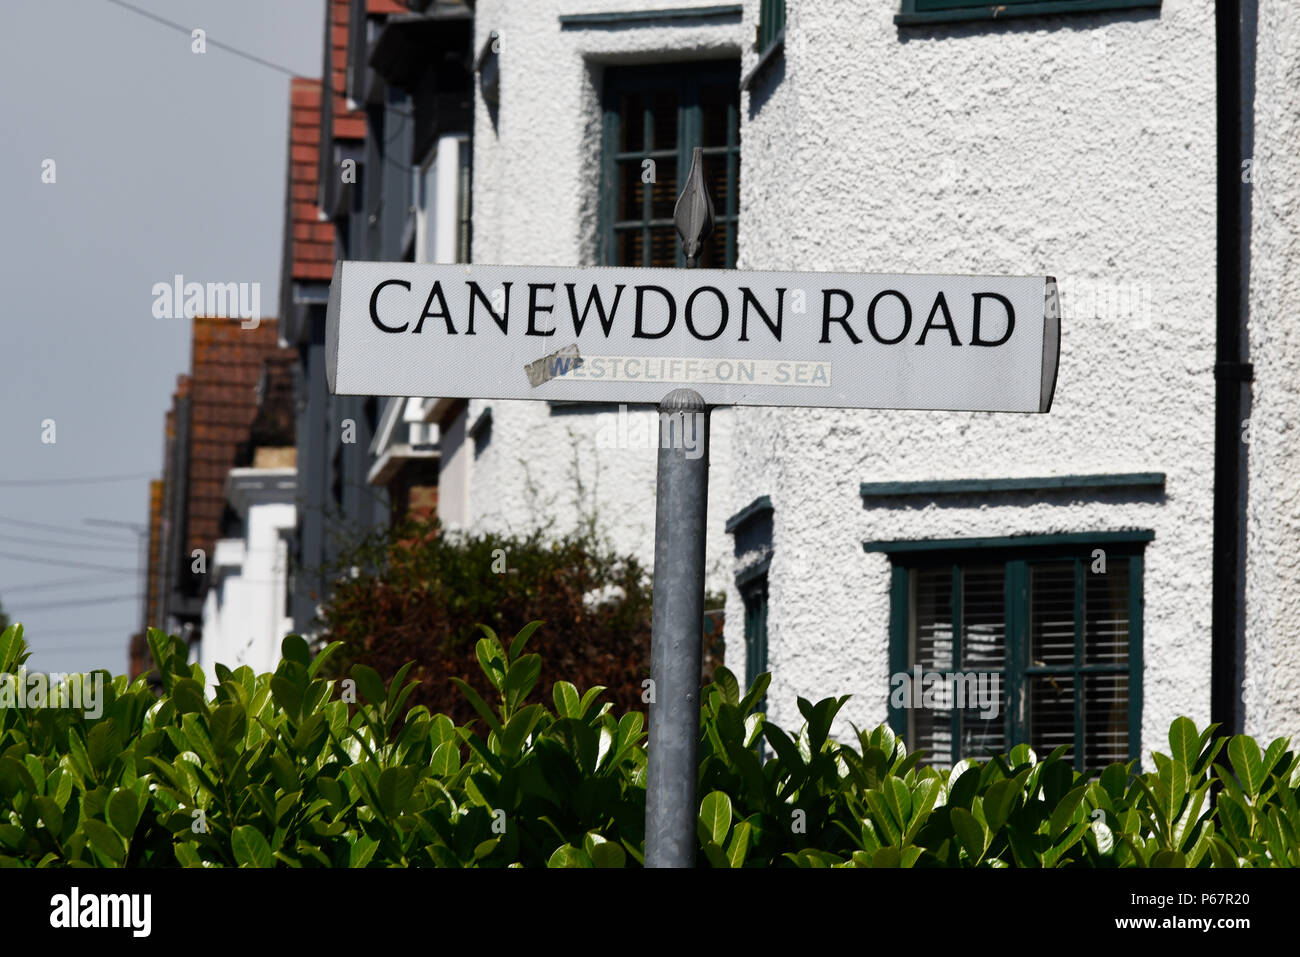 Canewdon Road street sign, road sign signpost in Westcliff on Sea, Essex, UK. Properties. Property Stock Photo